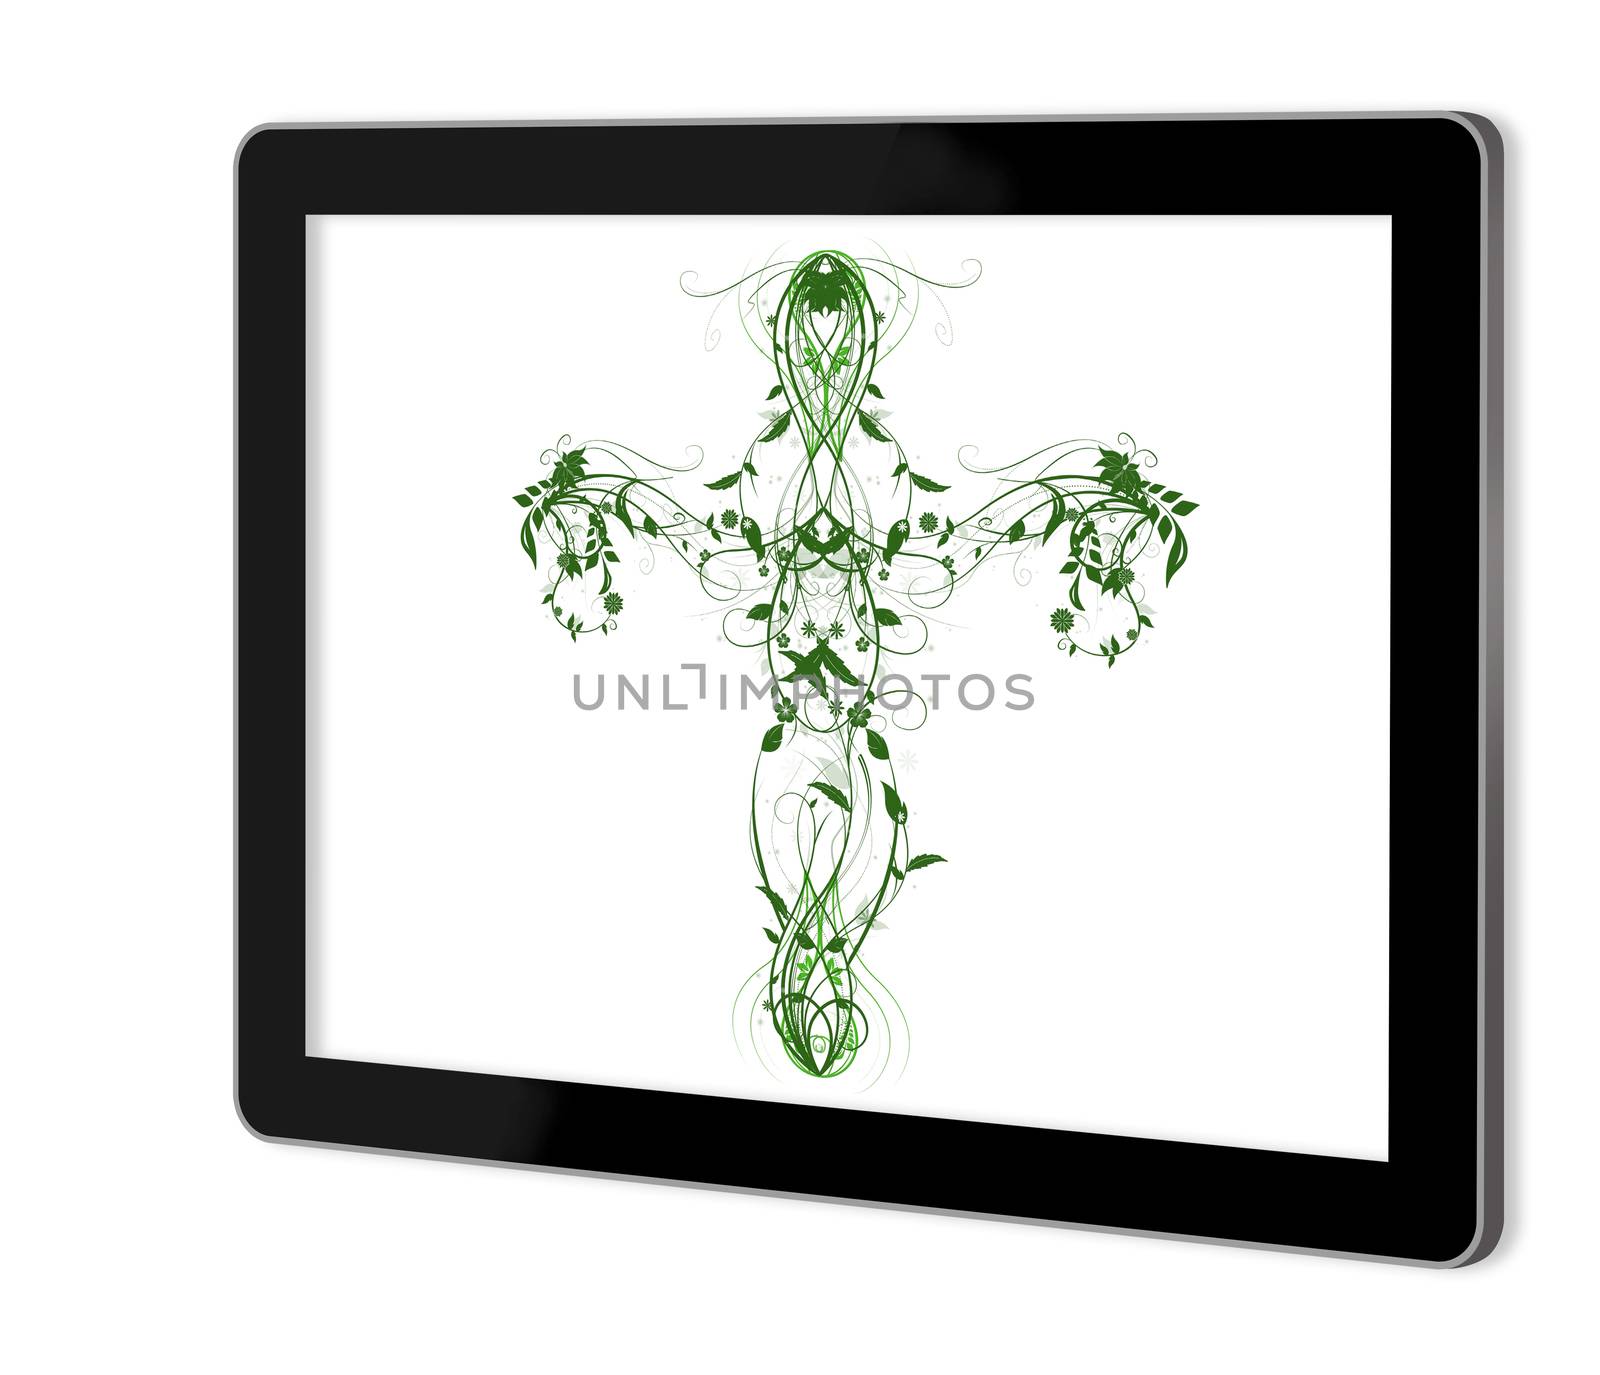 Green Floral Cross on  screen of tablet  made in 3d software